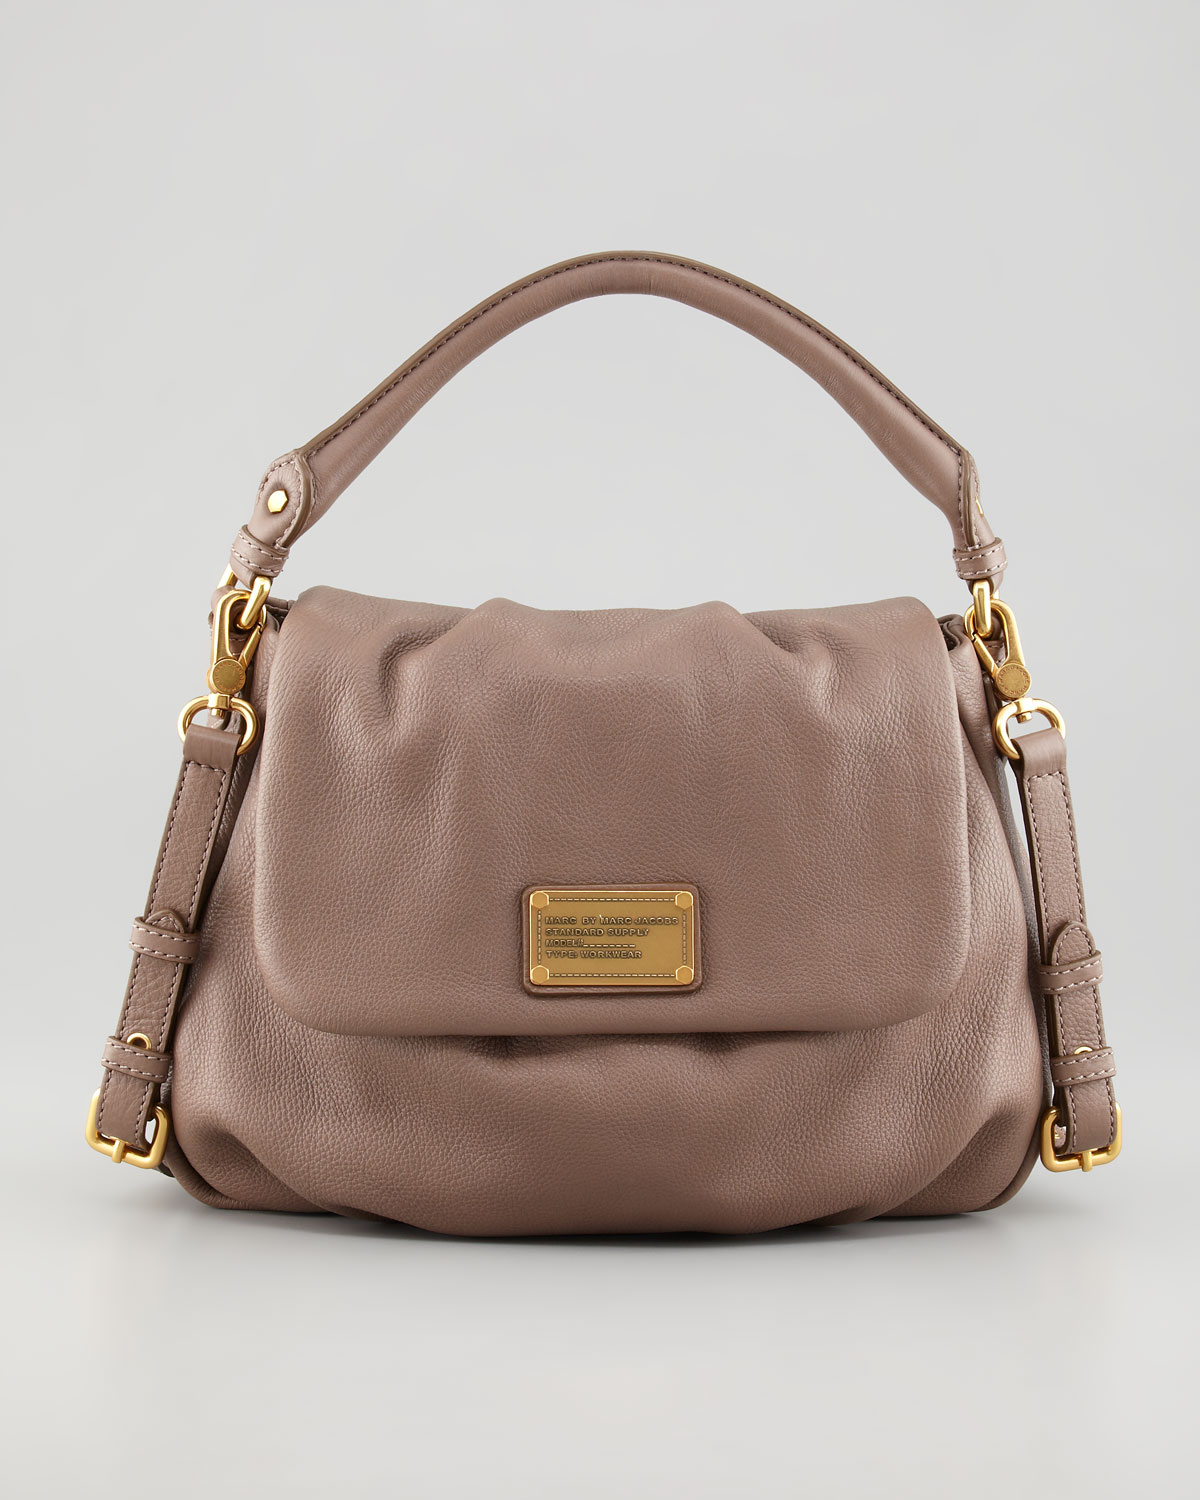 Lyst - Marc By Marc Jacobs Classic Q Lil Ukita Satchel Bag Brown in Brown